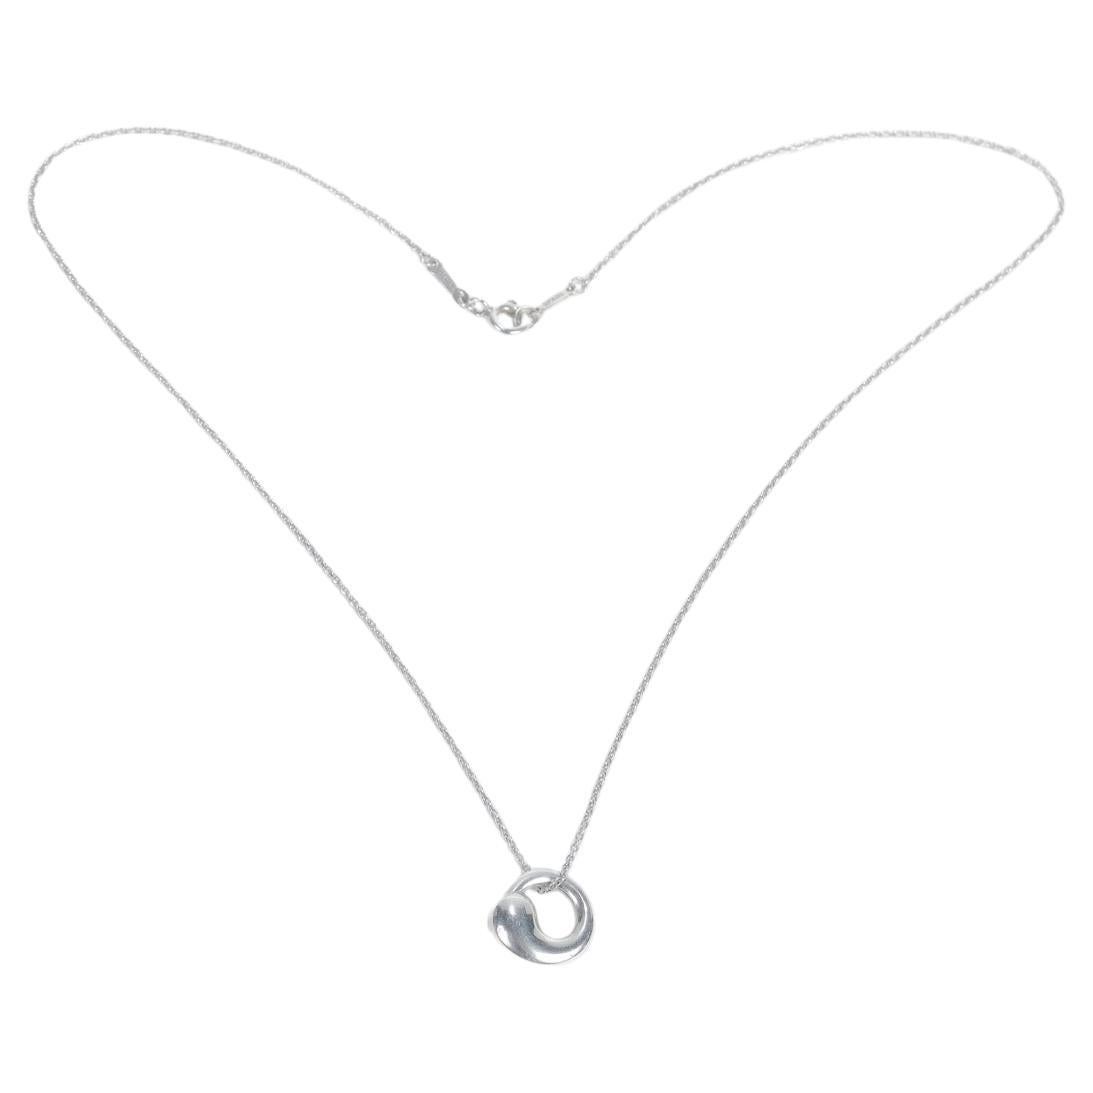 Sterling Silver Elsa Peretti for Tiffany & Co. Eternal Circle Pendant Necklace